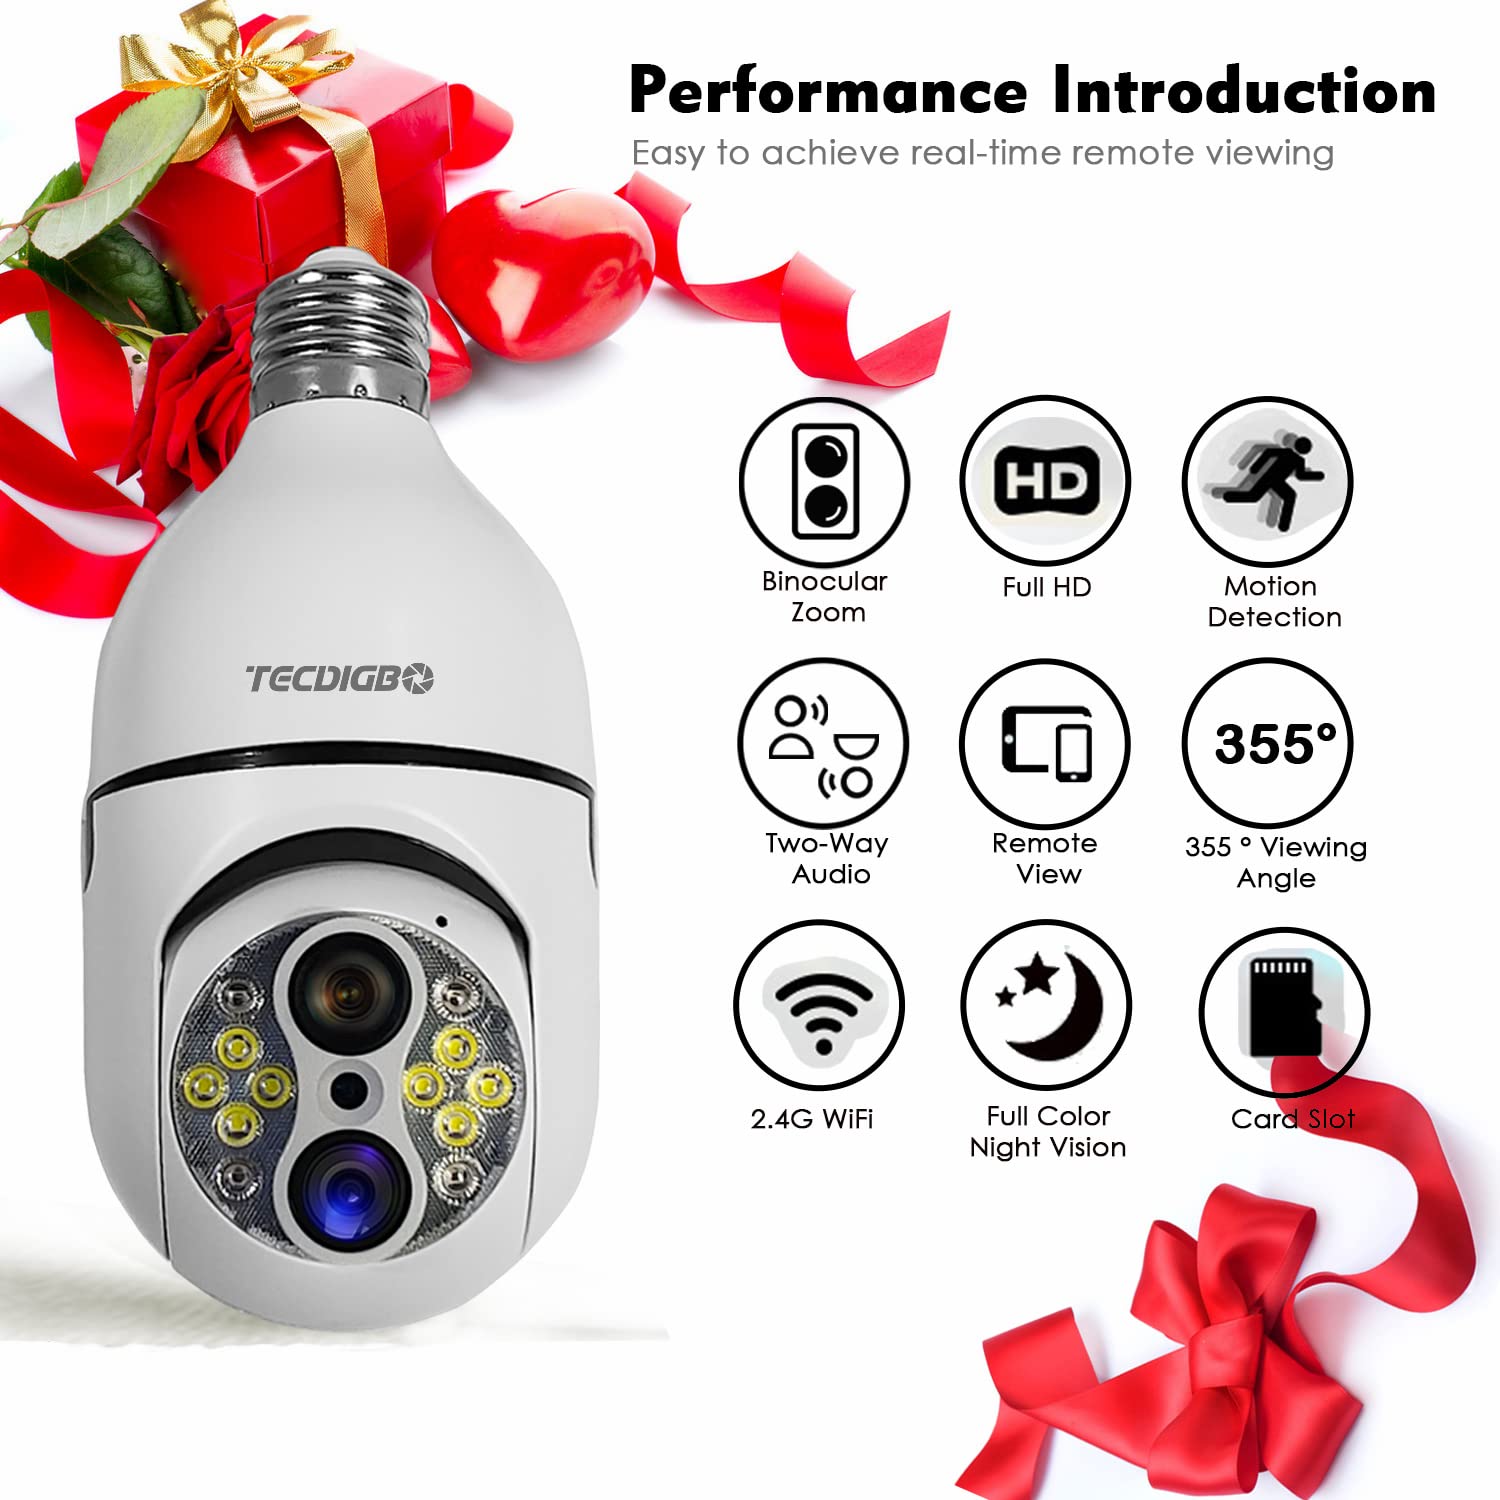 10X Hybrid Zoom Light Bulb Security Camera, 2MP Light Socket Security Camera Outdoor Indoor, Wireless WiFi Home Security Cameras, Full Color Night Vision, Two-Way Dialogue, Motion Tracking